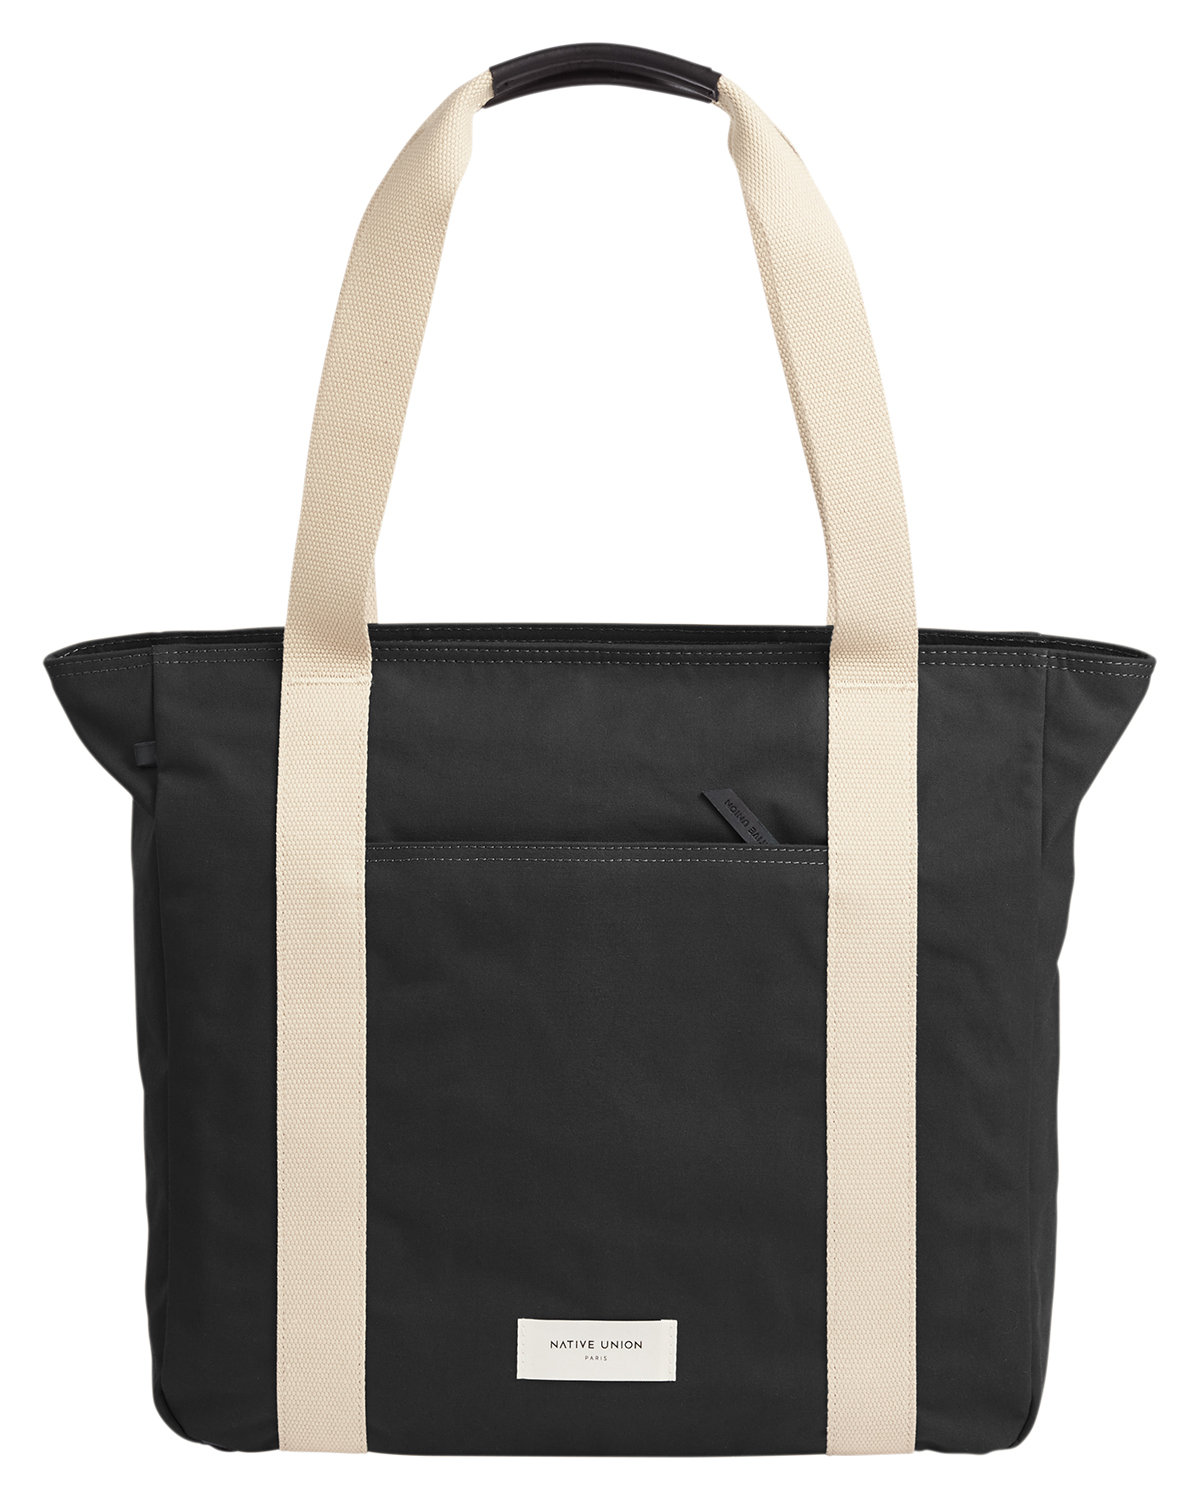 Native Union Work From Anywhere Tote Bag | alphabroder